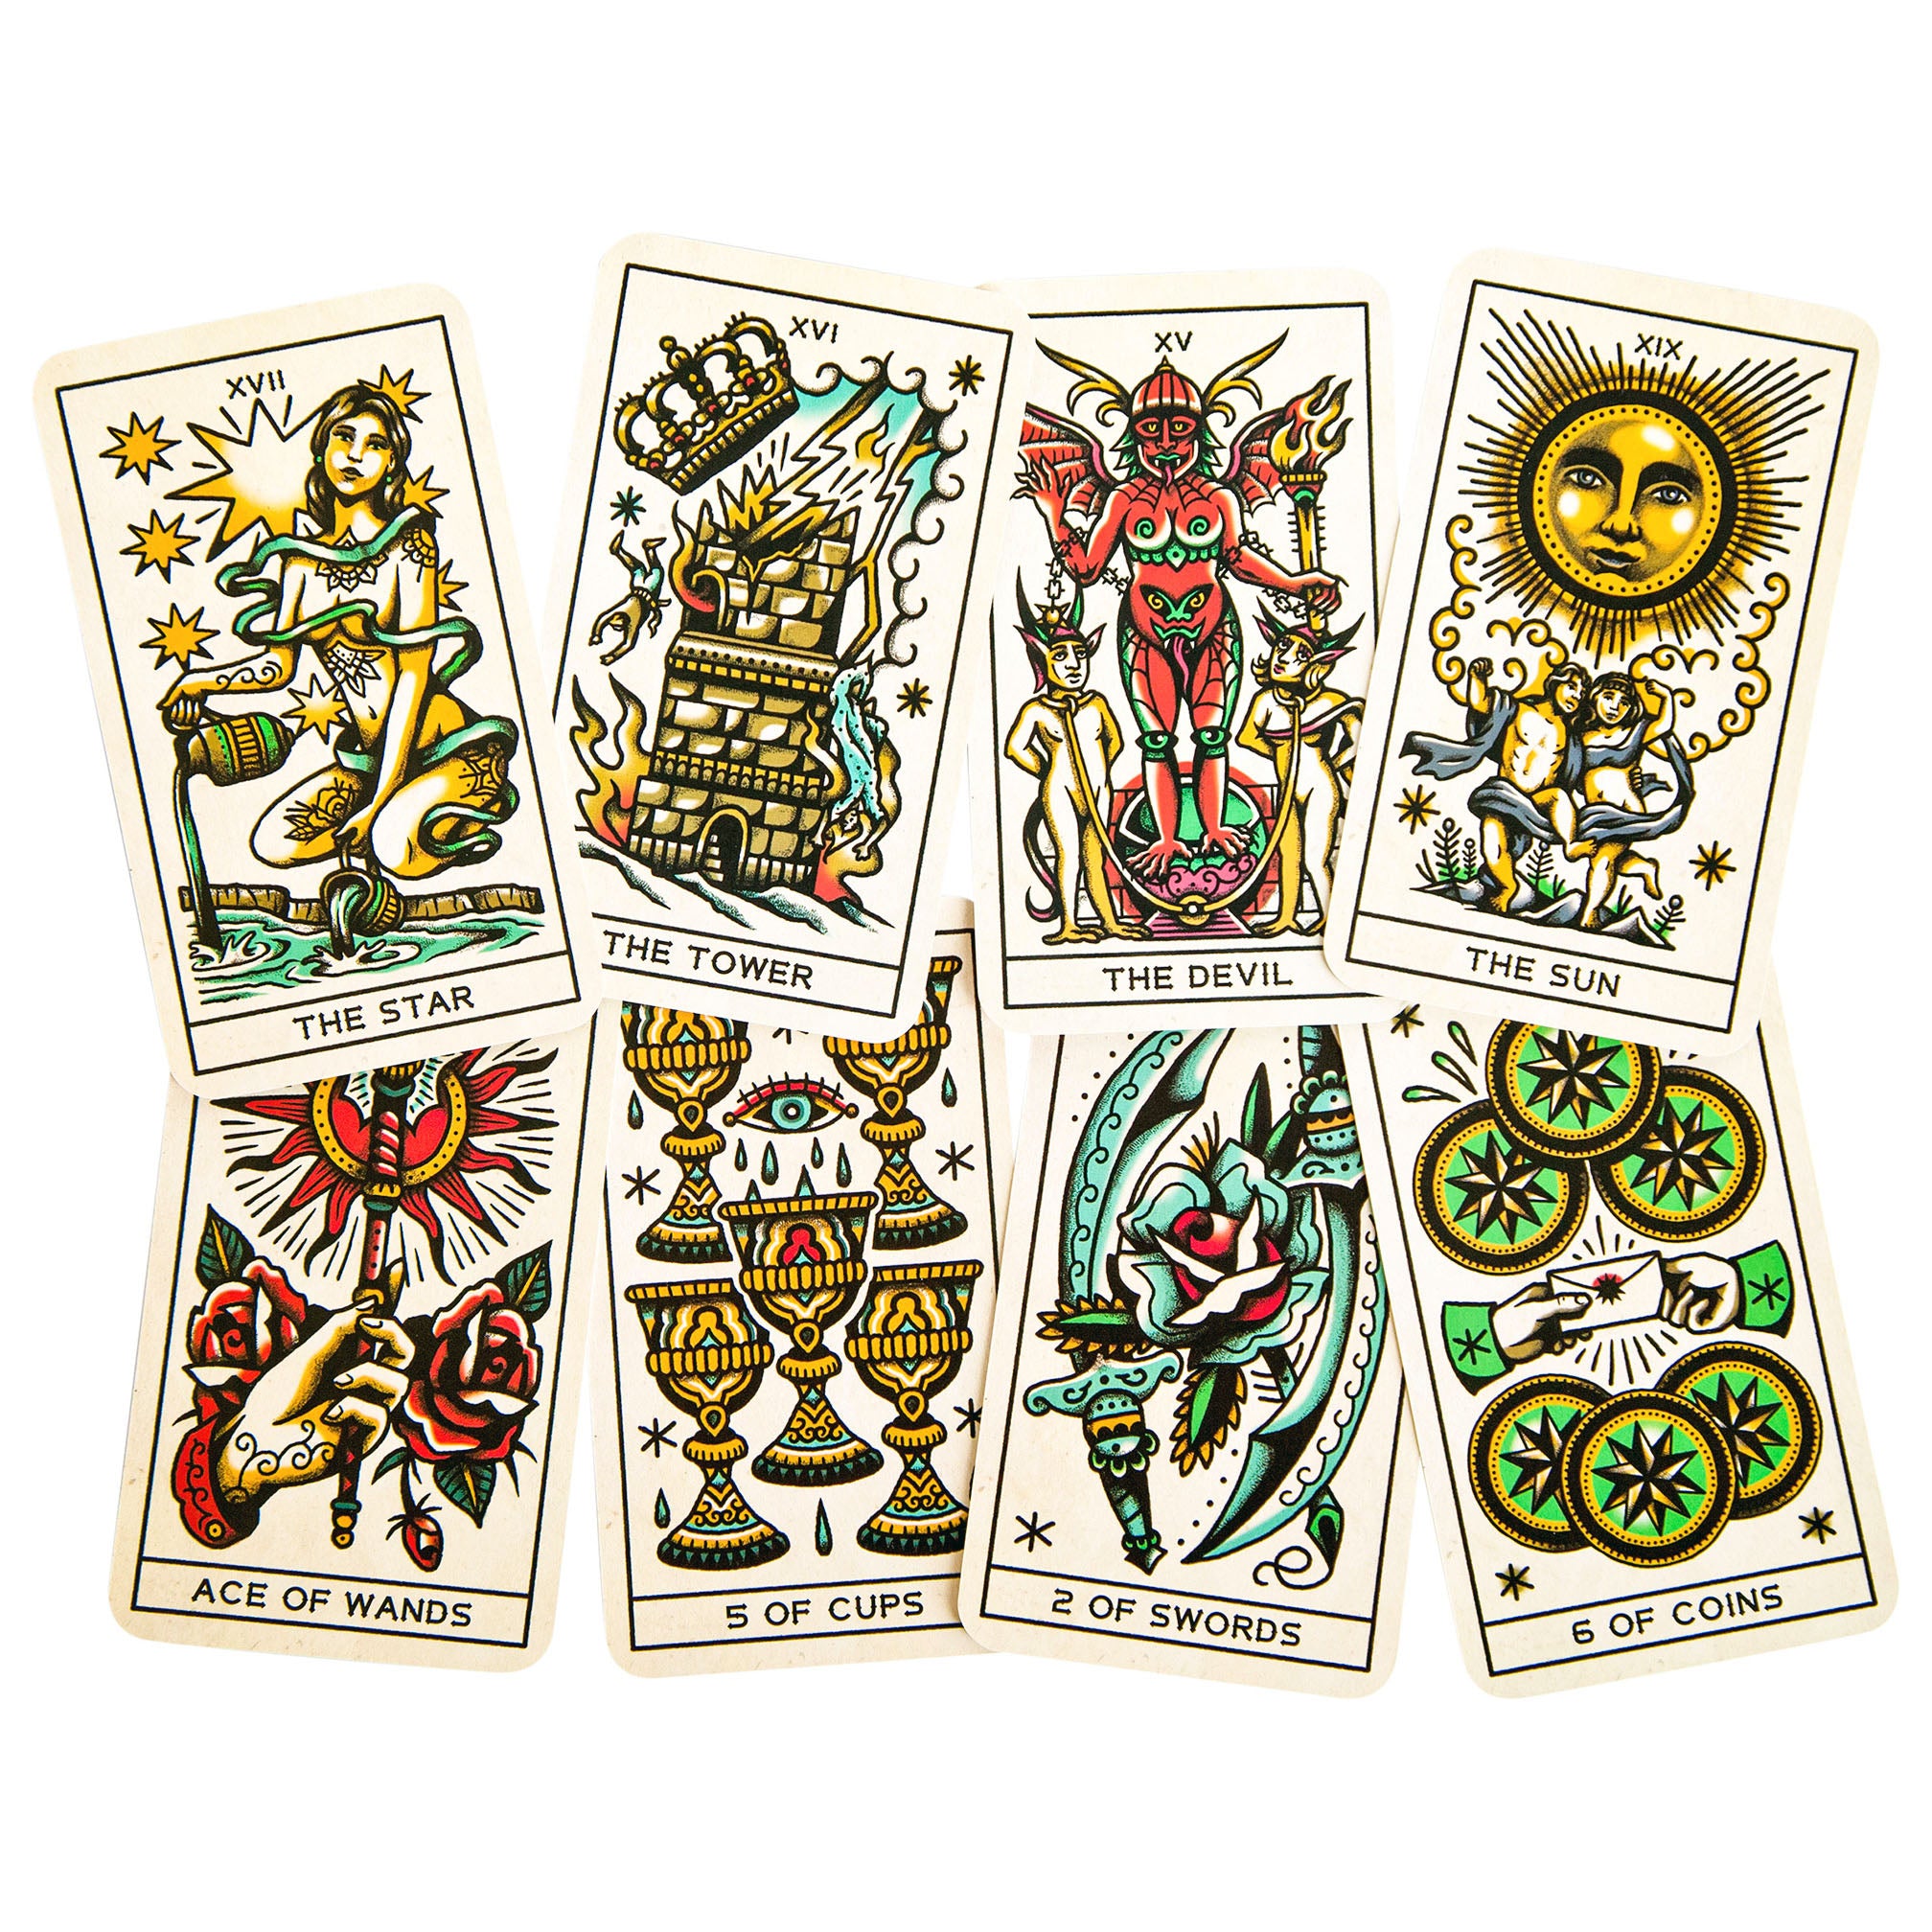 Discover Your Destiny with Tarot Card Tattoos  Tattoo Ideas Artists and  Models